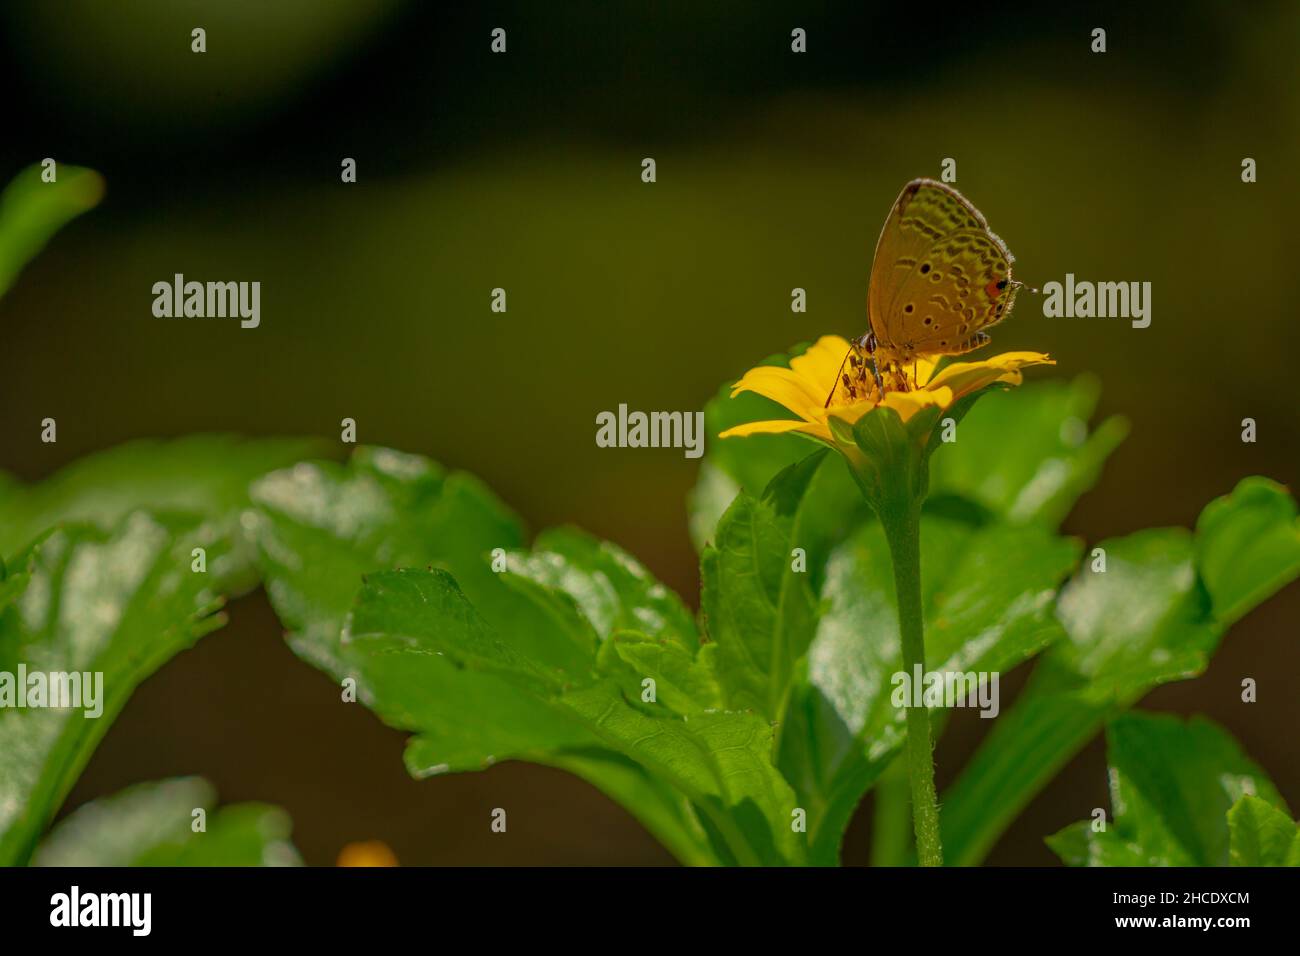 A brown butterfly looking for honey and perched on a yellow creeping buttercup flower blurred green foliage background, nature concept Stock Photo